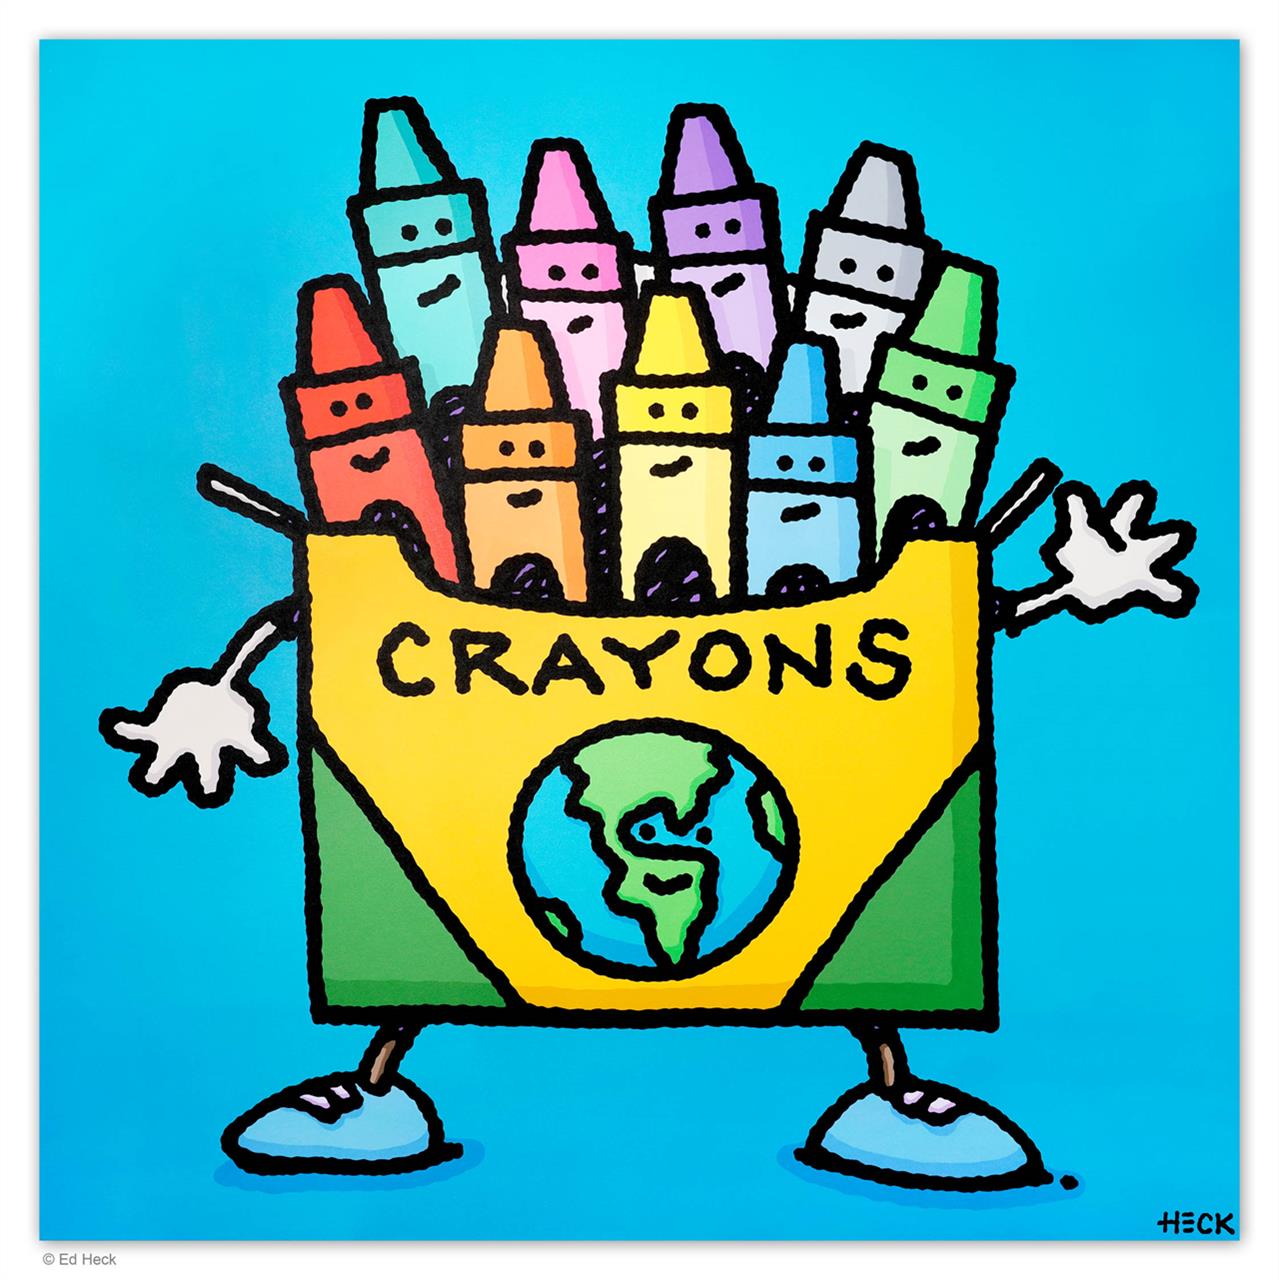 WE ARE ALL CRAYONS